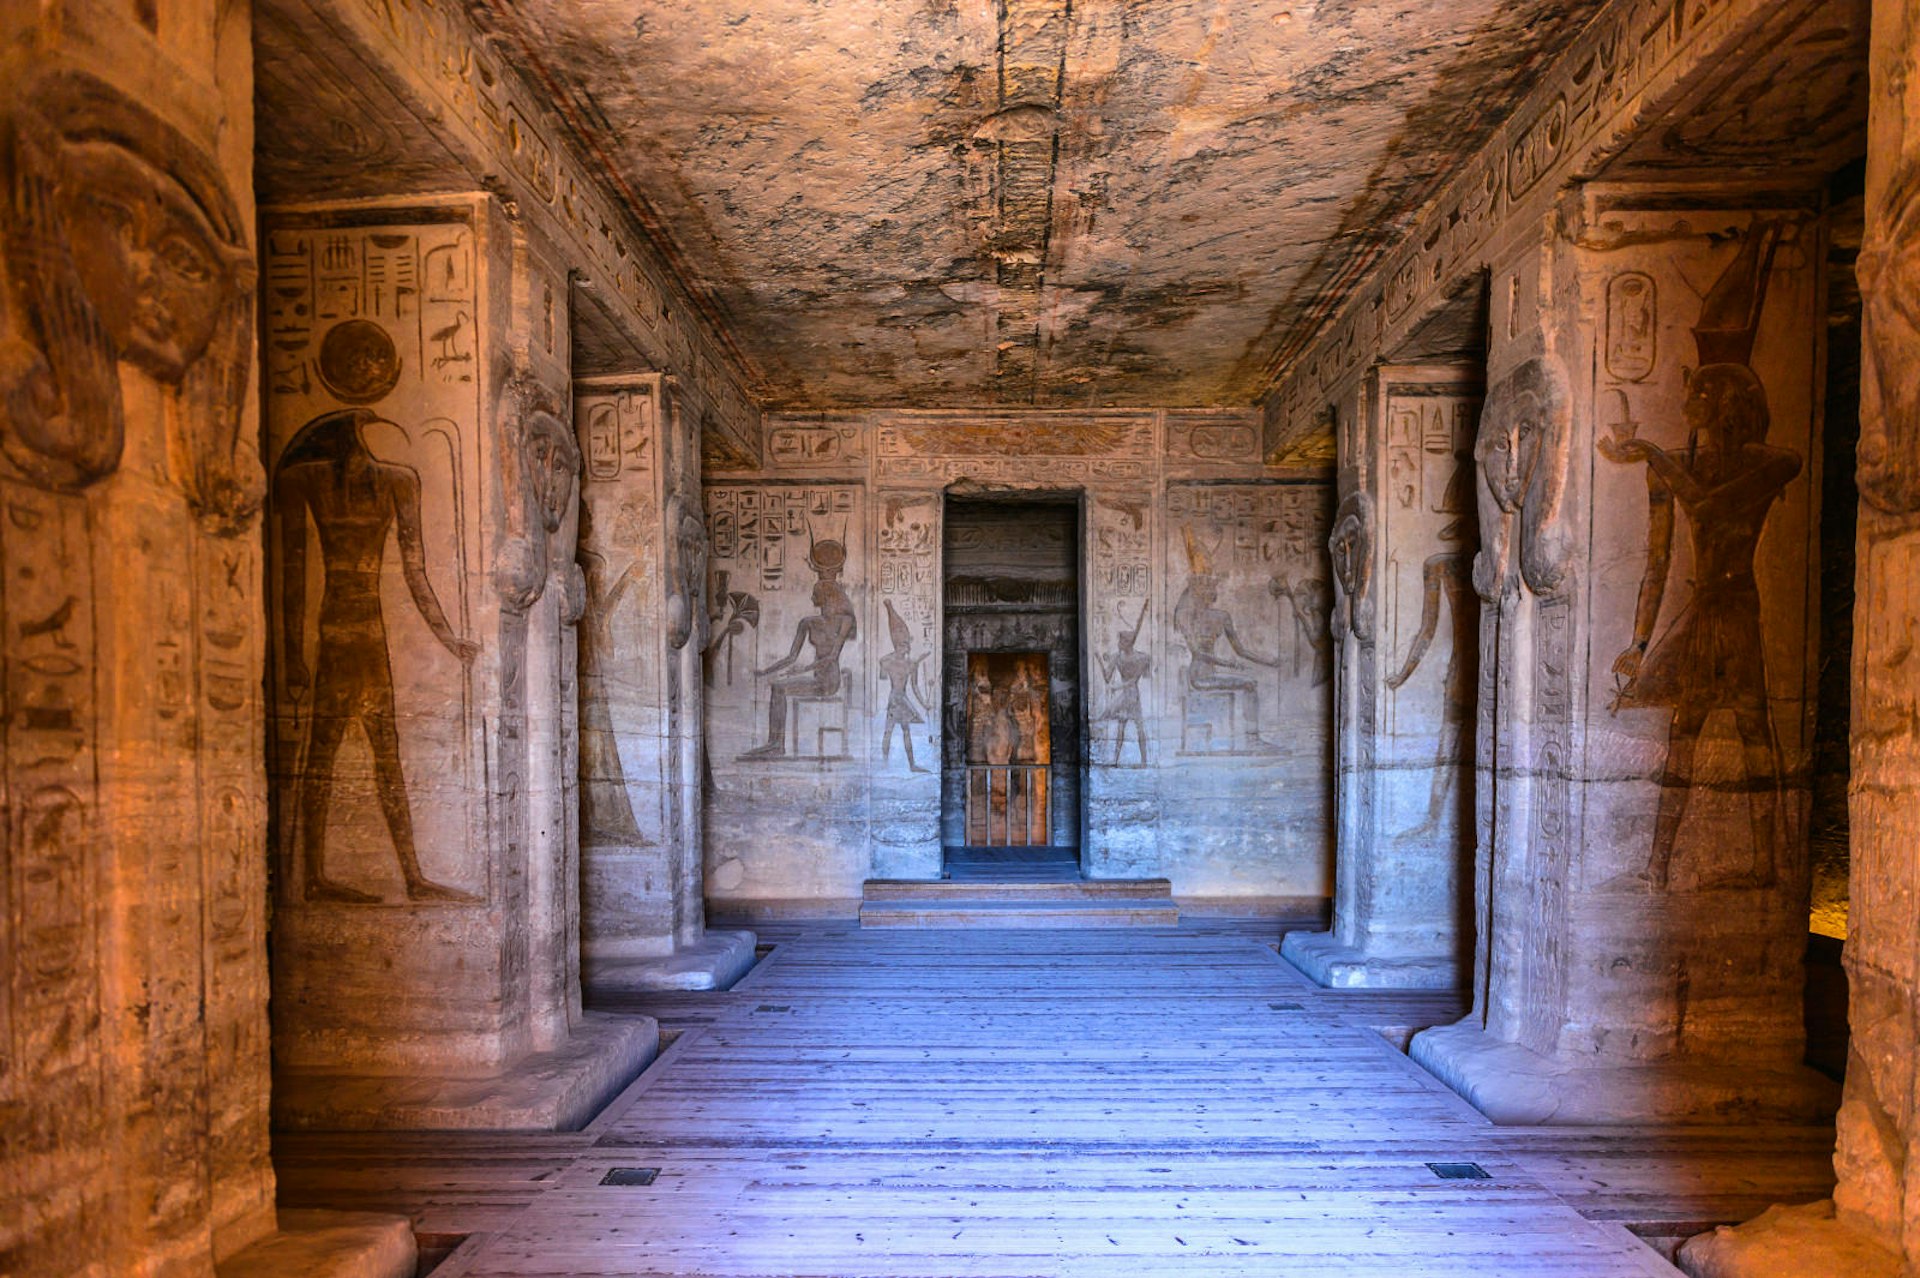 Interior of The Great Temple of Ramses II at sunrise, Abu Simbel, Egypt. Image by Anton_Ivanov / Shutterstock